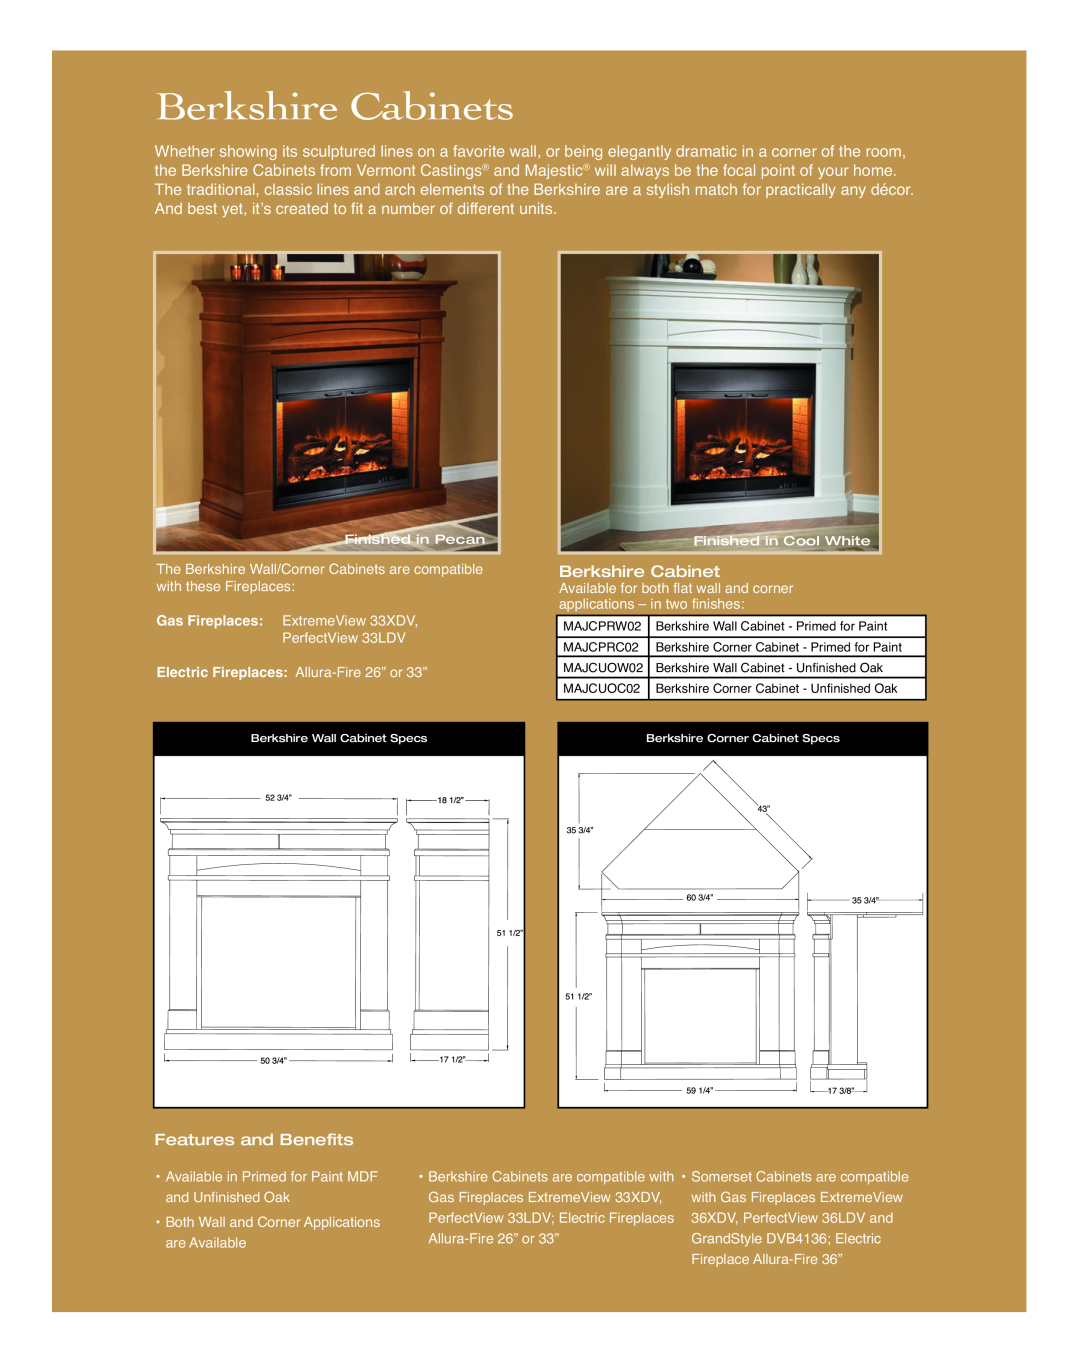 Vermont Casting Classic Series manual Berkshire Cabinets 